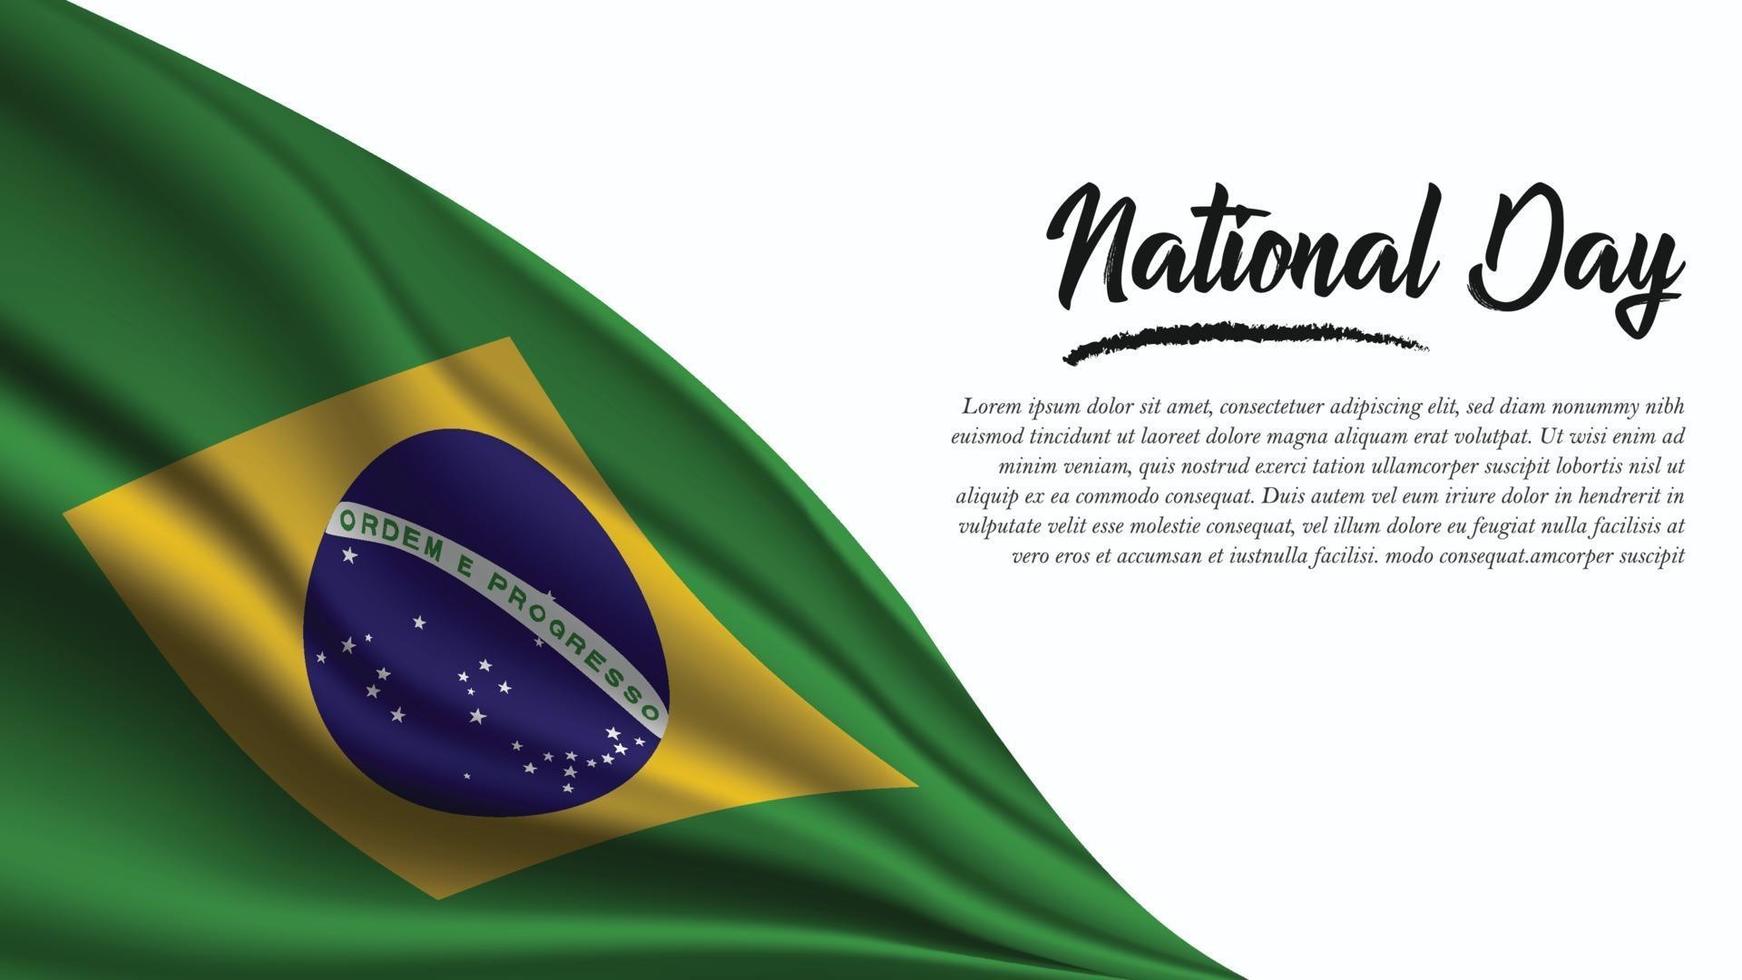 National Day Banner with Brazil Flag background vector